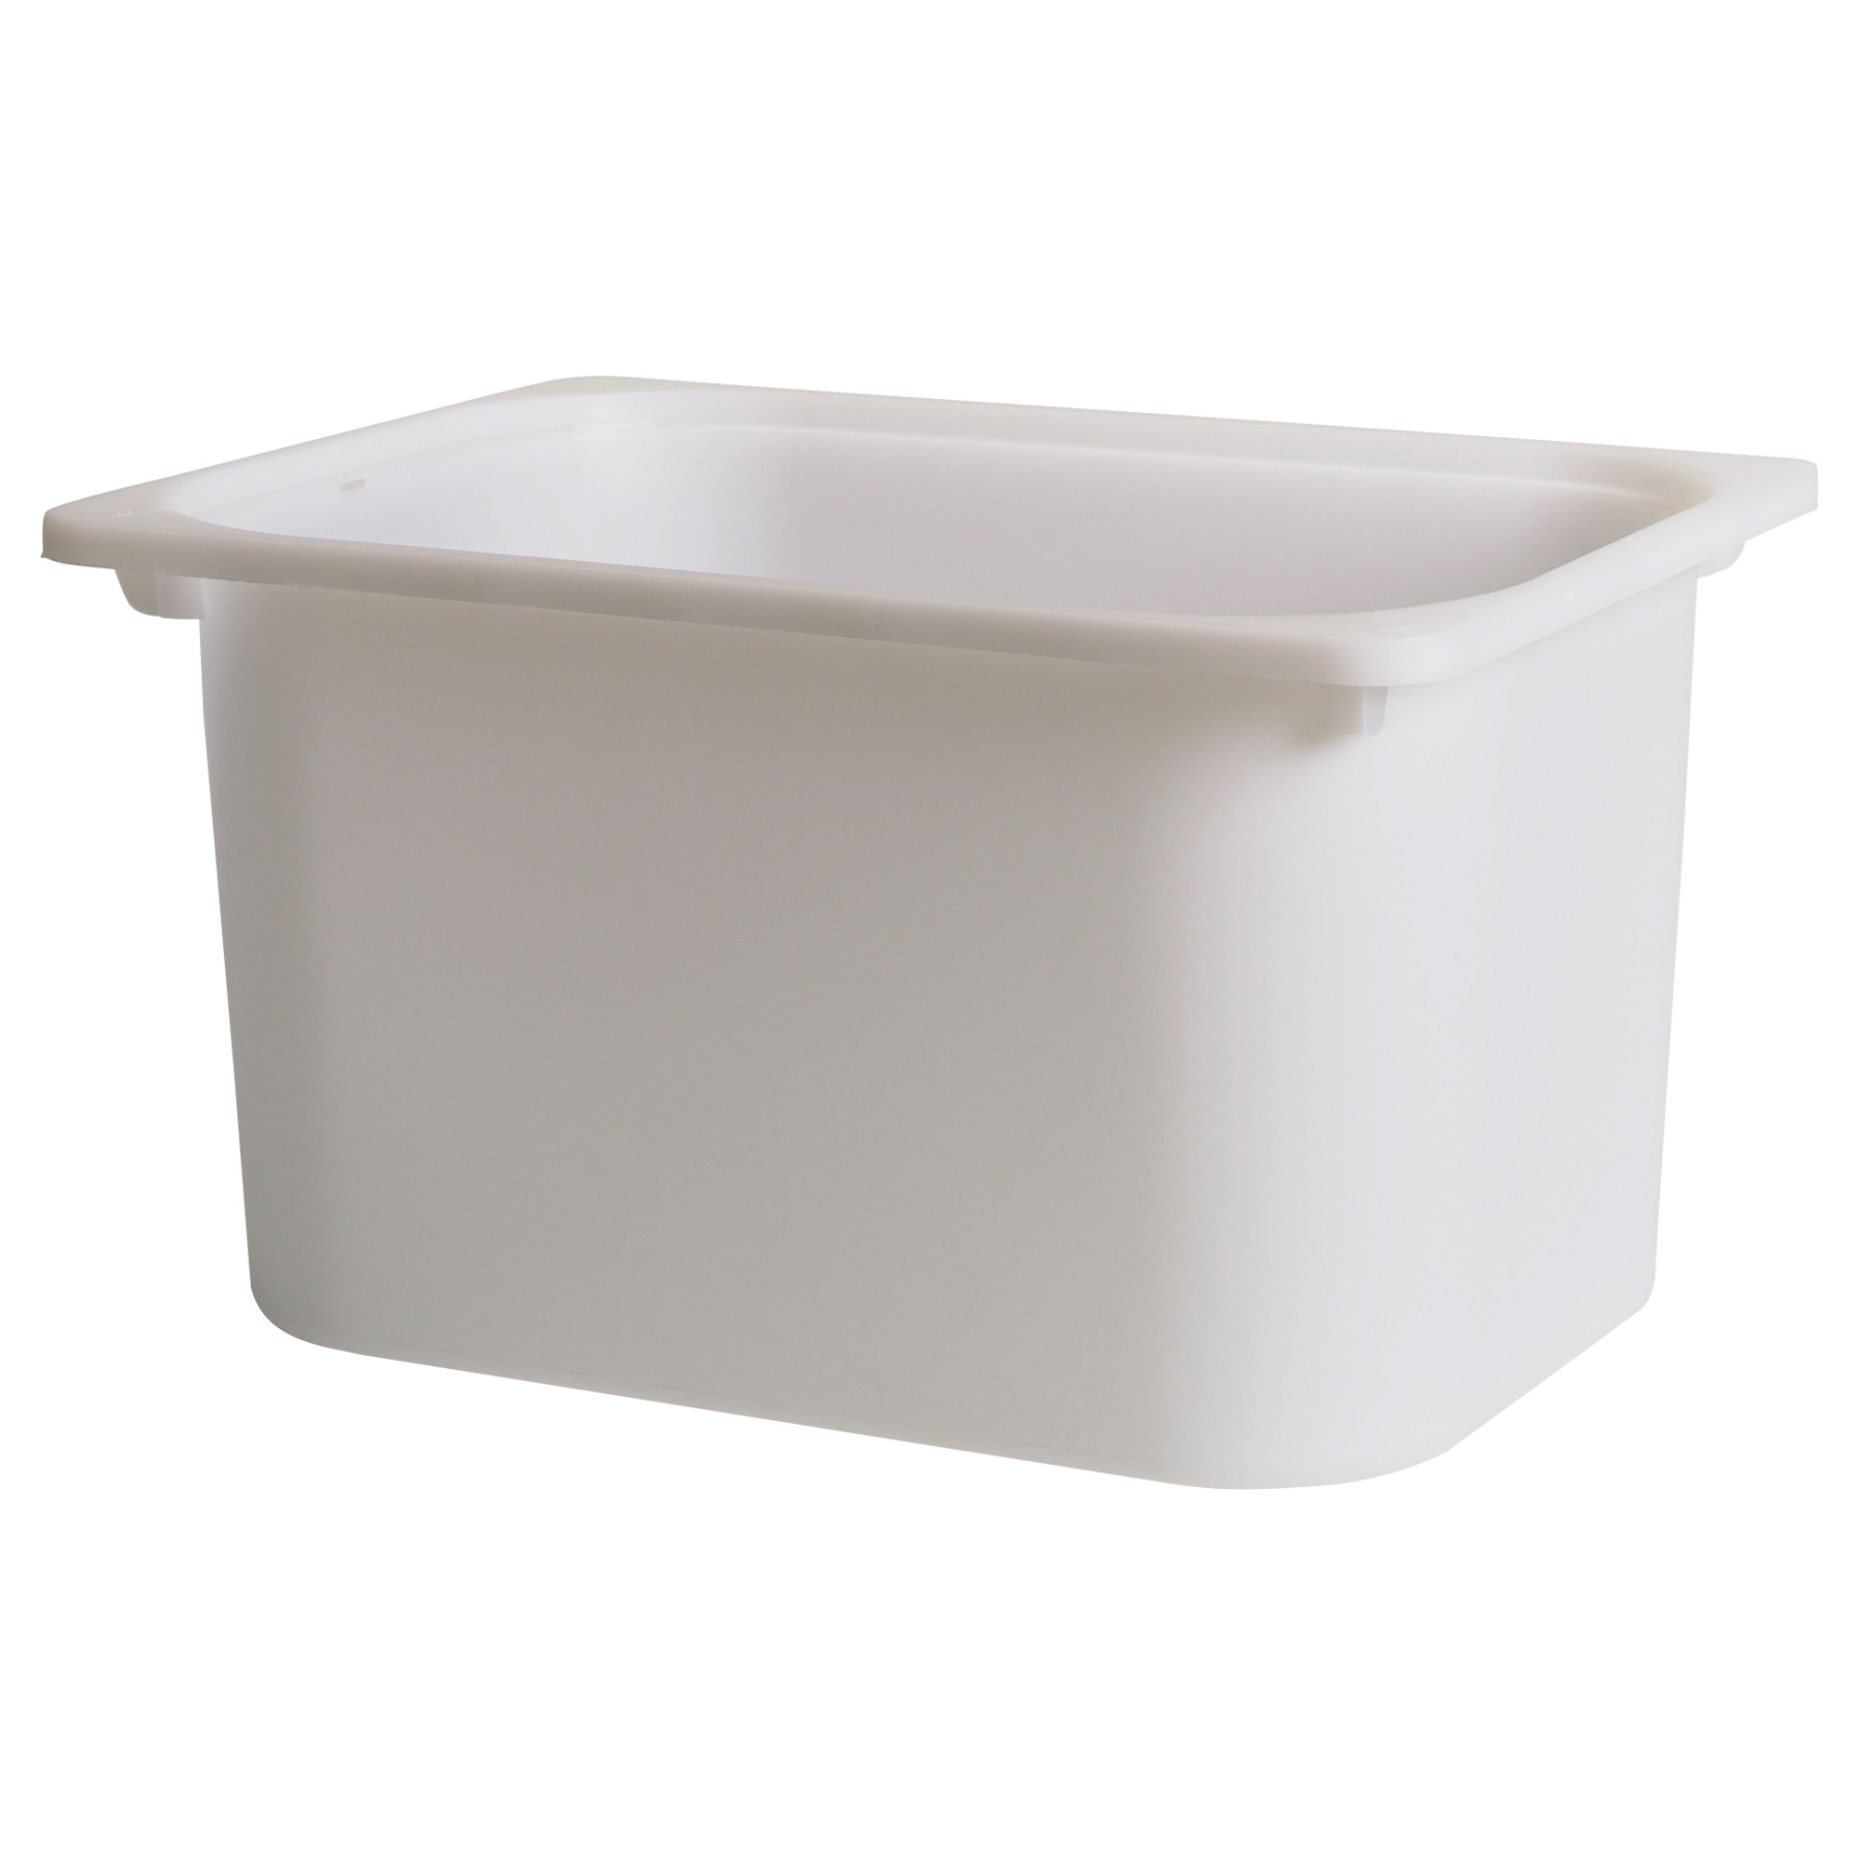 TROFAST, box with lid, 298.194.96